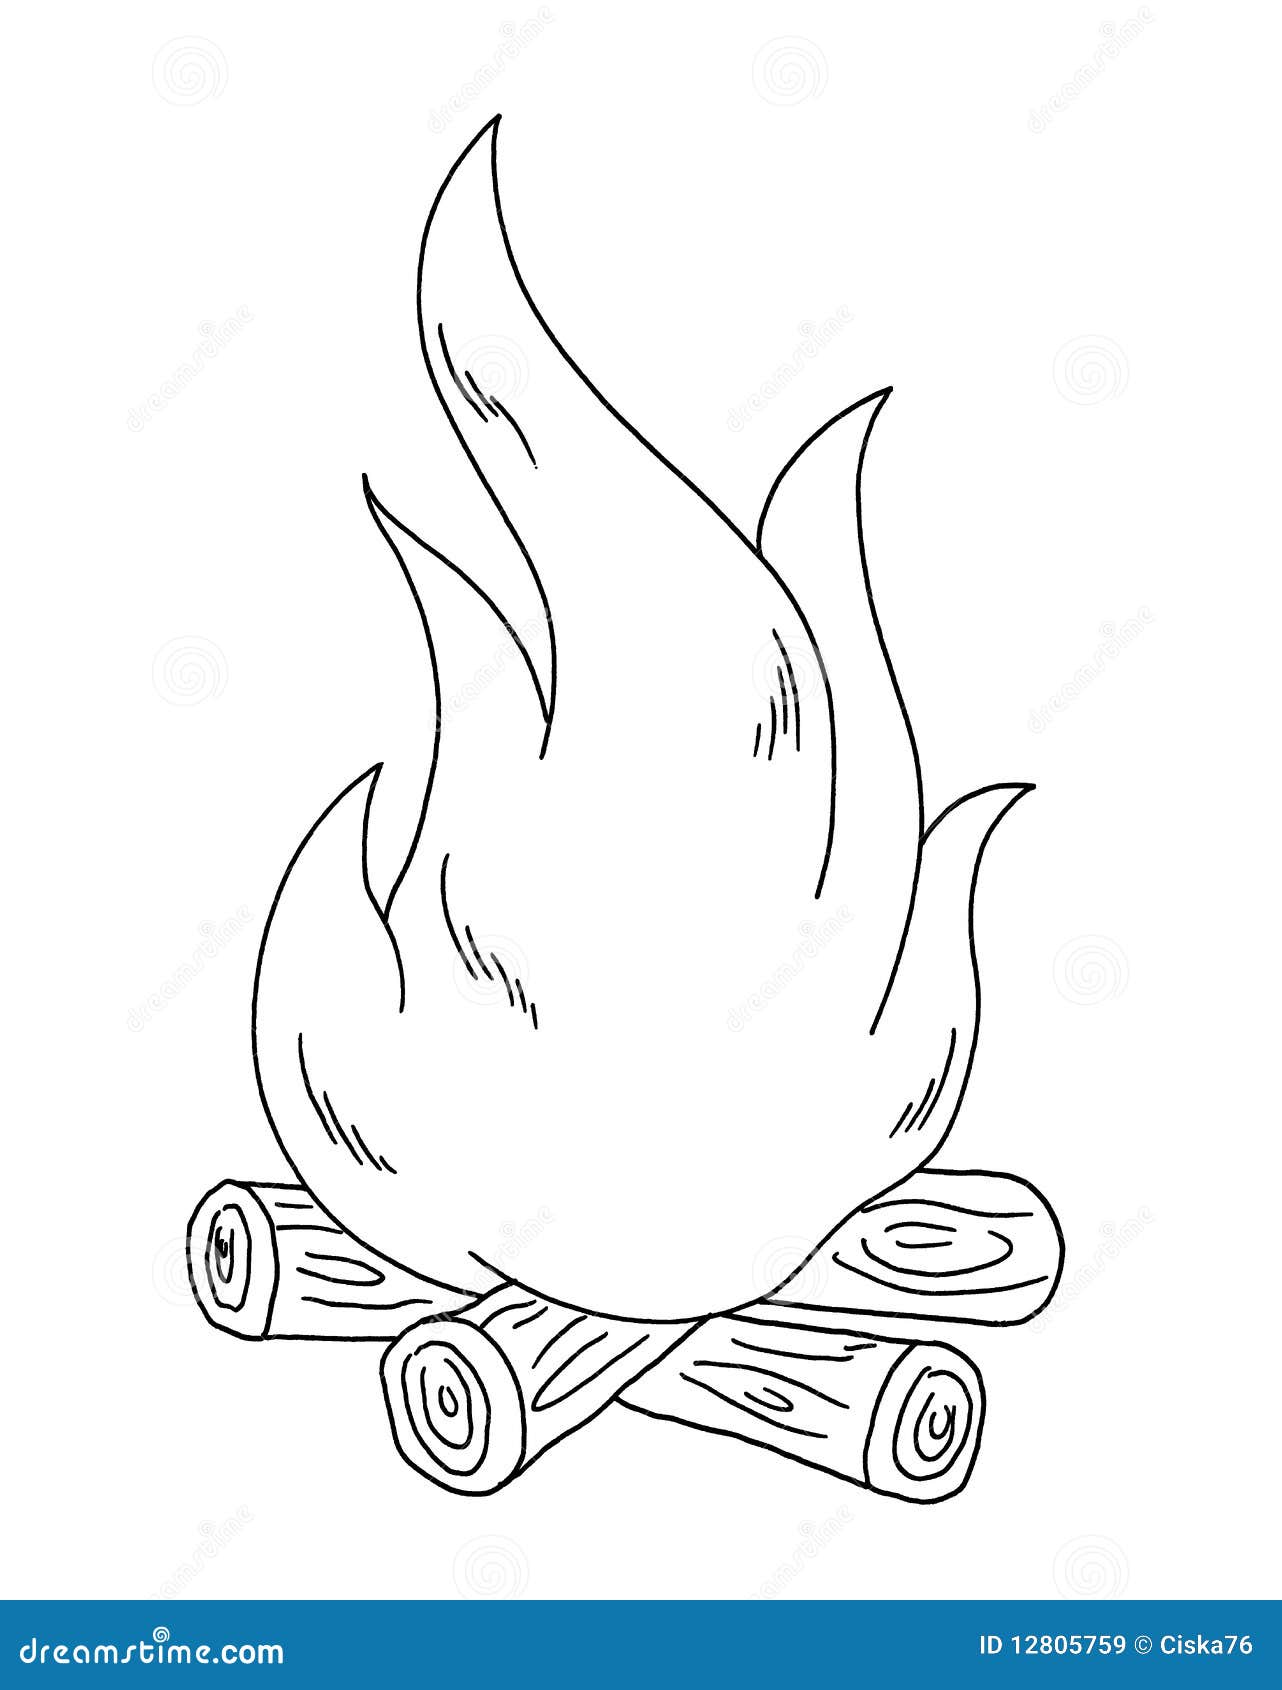 fire clipart black and white - photo #32